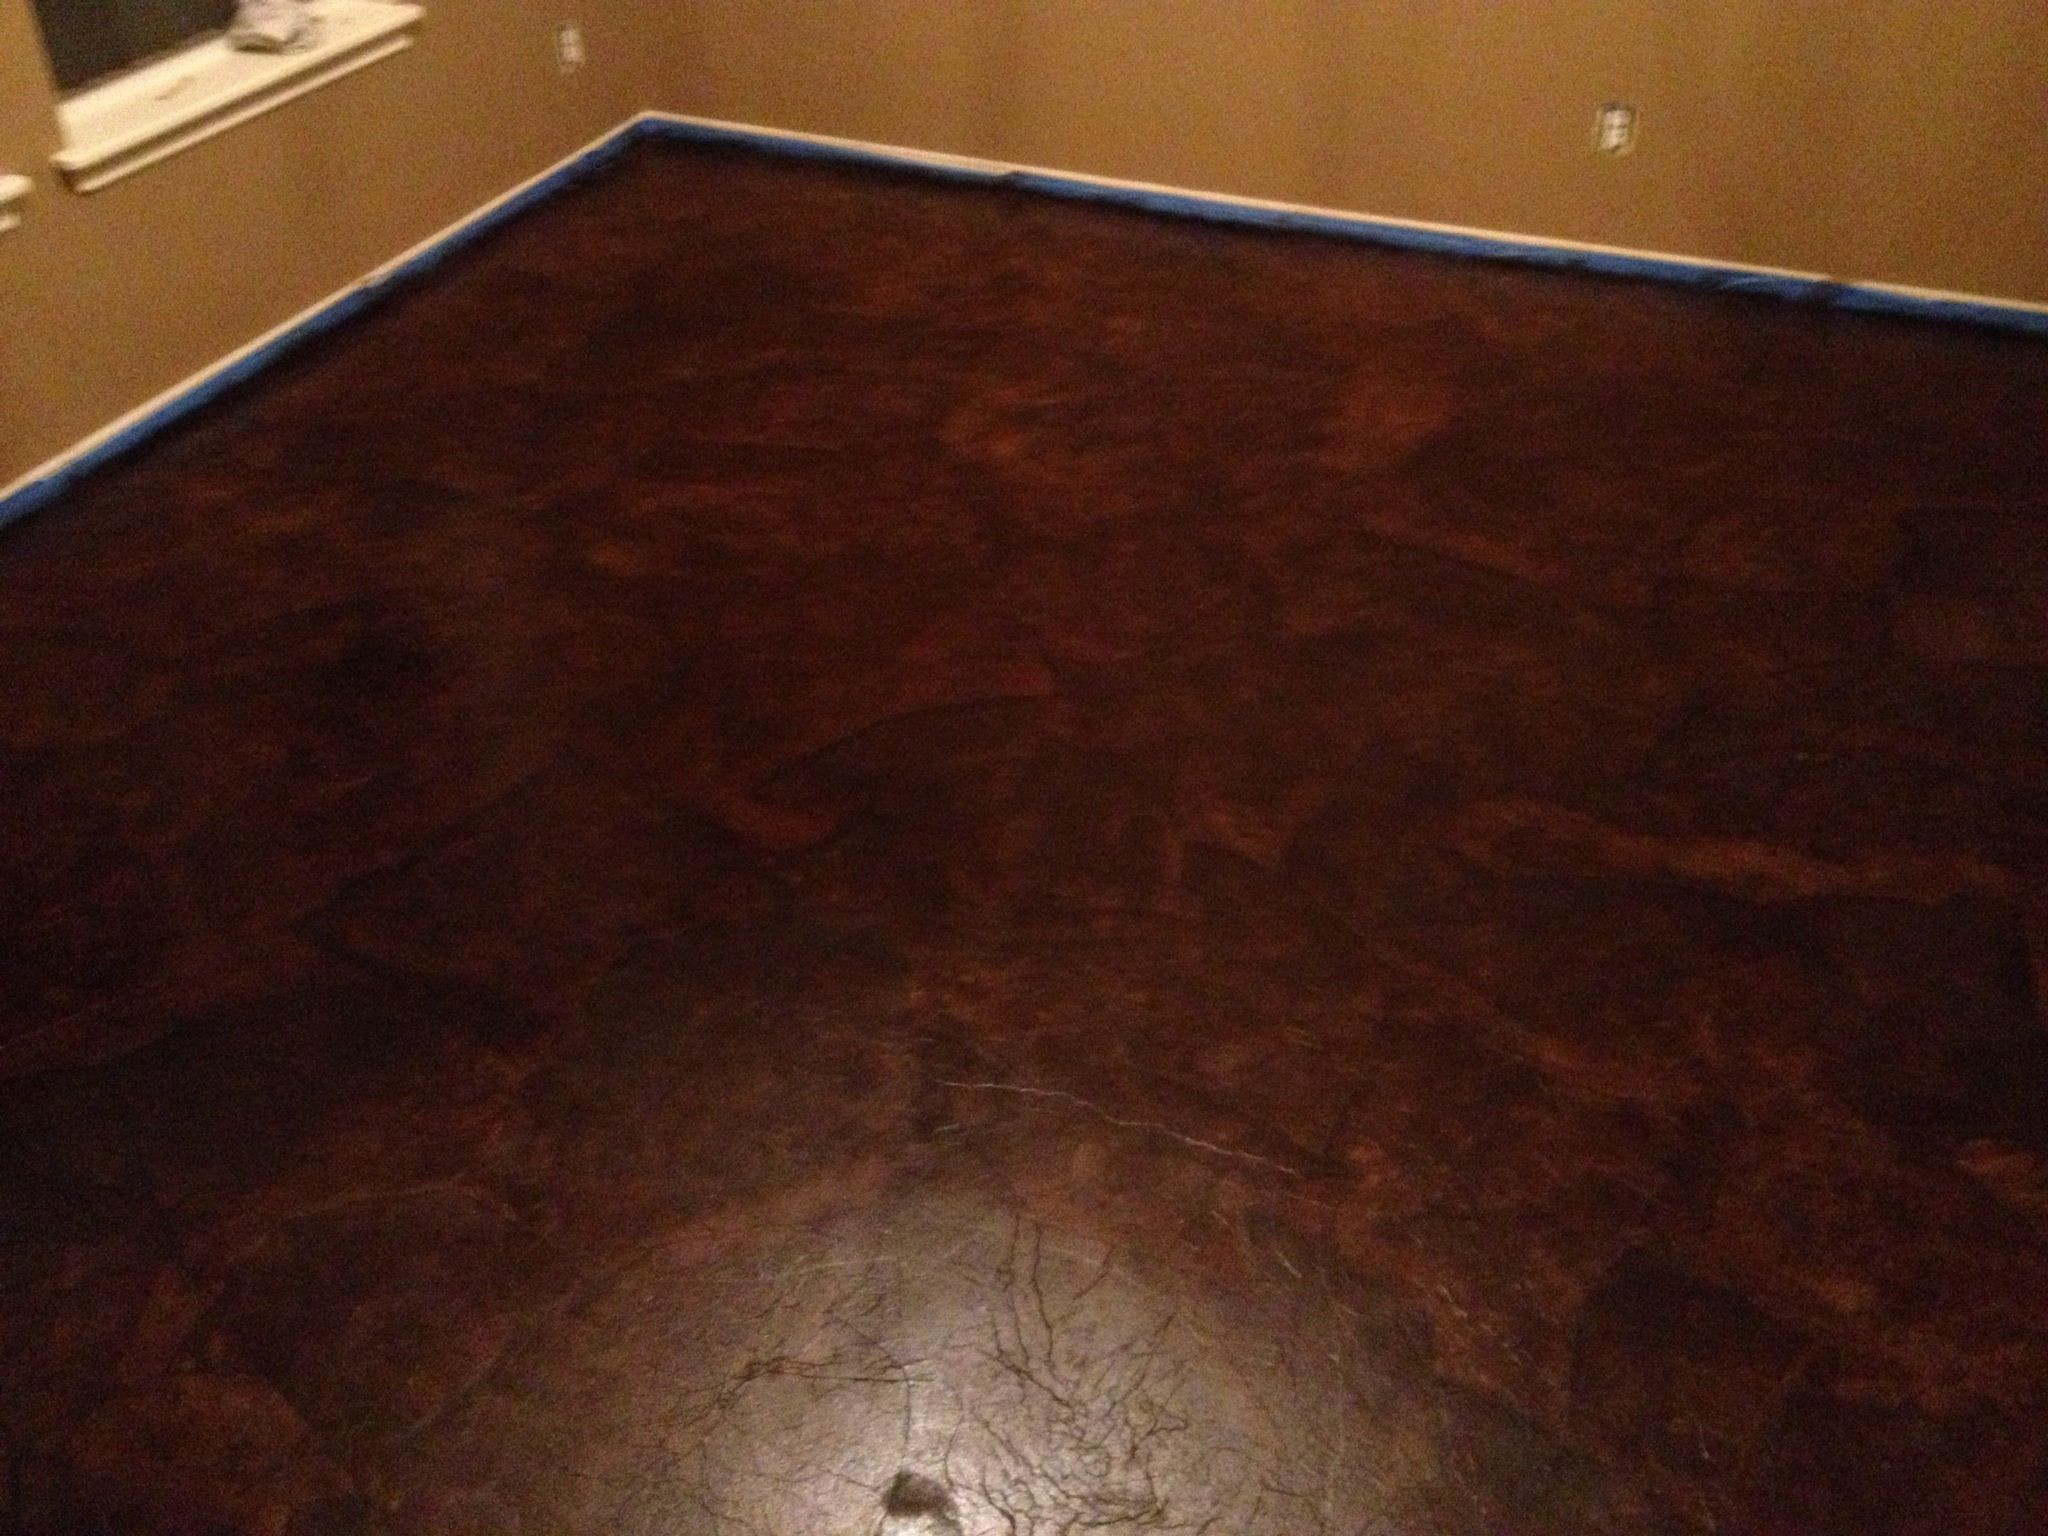 cost to glue down hardwood floor of diy paper bag floors that look like stained concrete diy brown intended for brown paper bag stained floors amazing project excellent instructions on how to complete the project